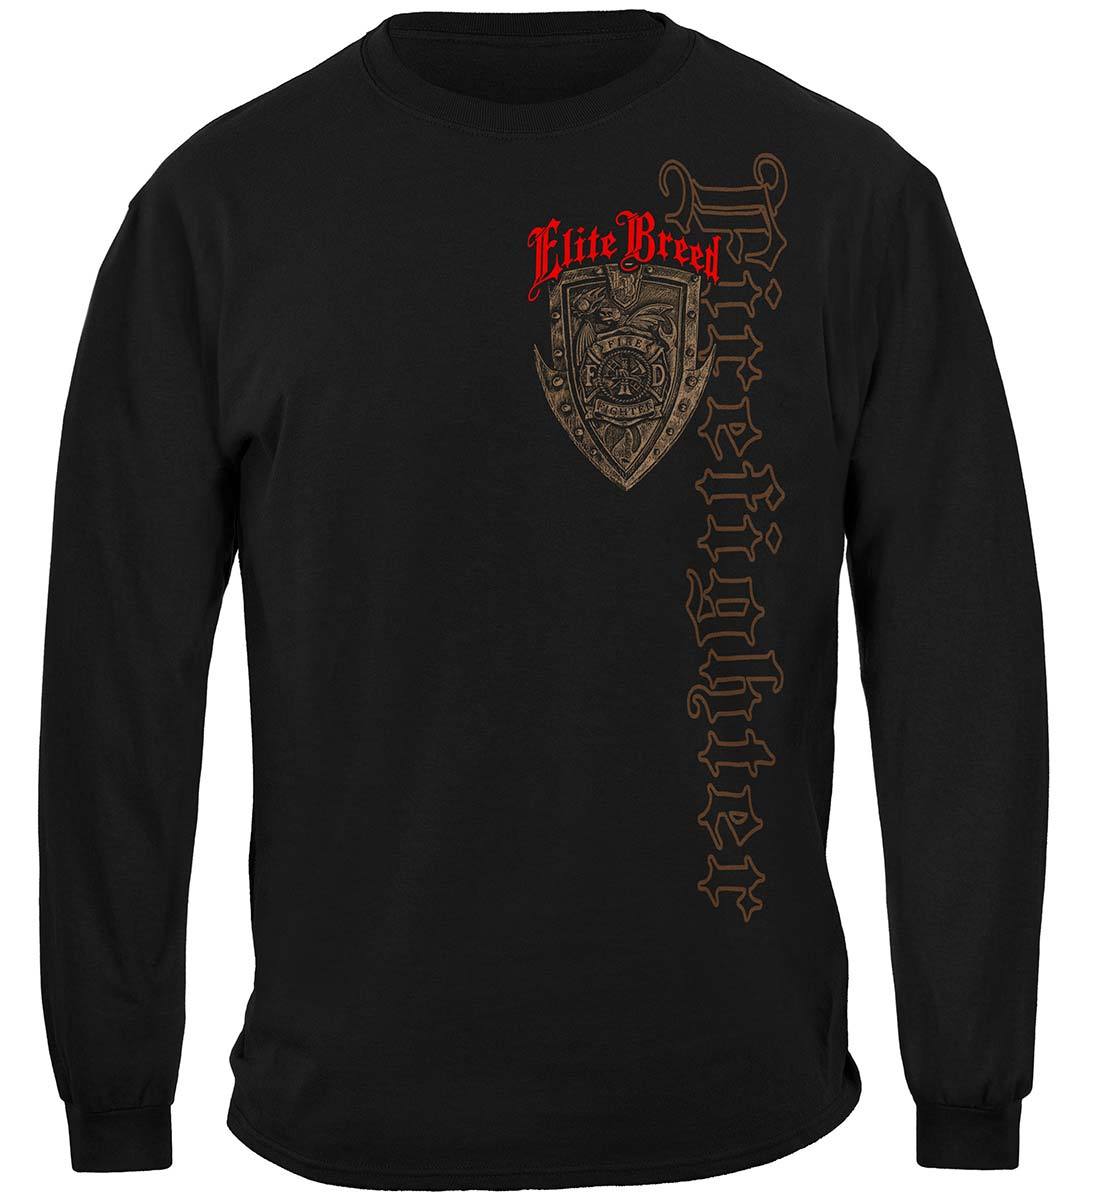 Elite Breed Firefighter Borne Or Your Not Premium Hooded Sweat Shirt